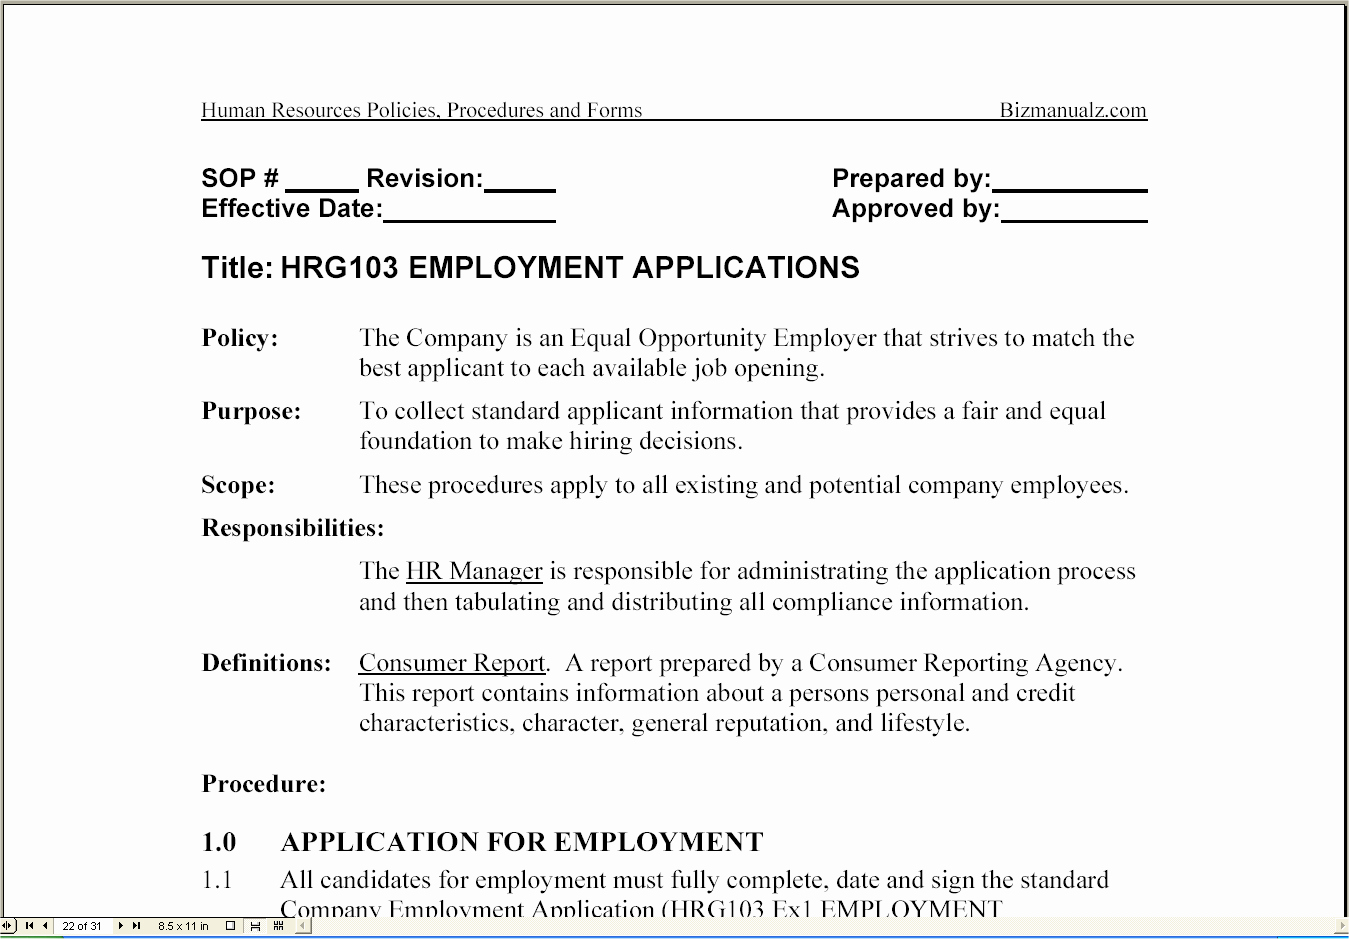 Human Resources Policy Template Beautiful Bizmanualz Human Resources Policies Procedures &amp; forms